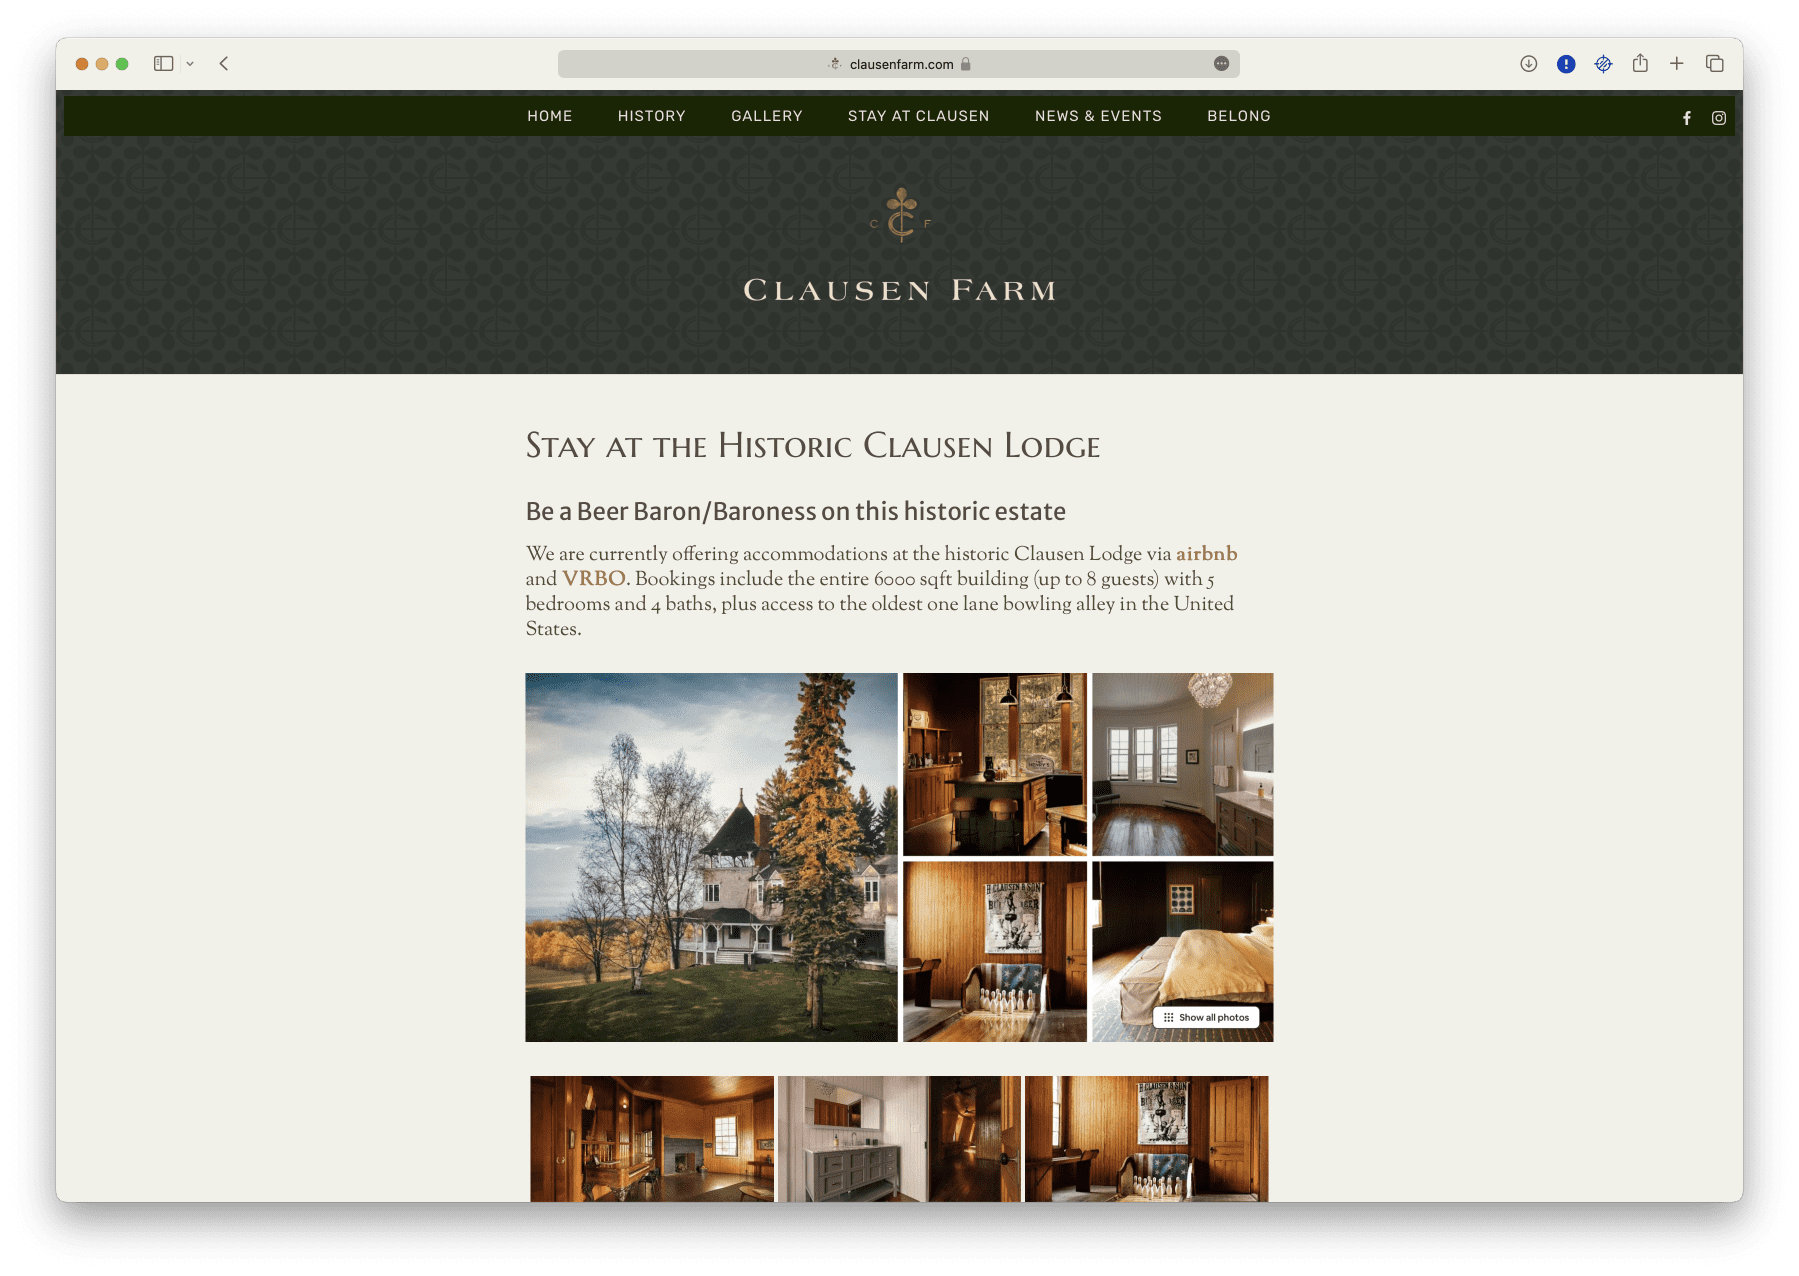 The web page created for Clausen Farm